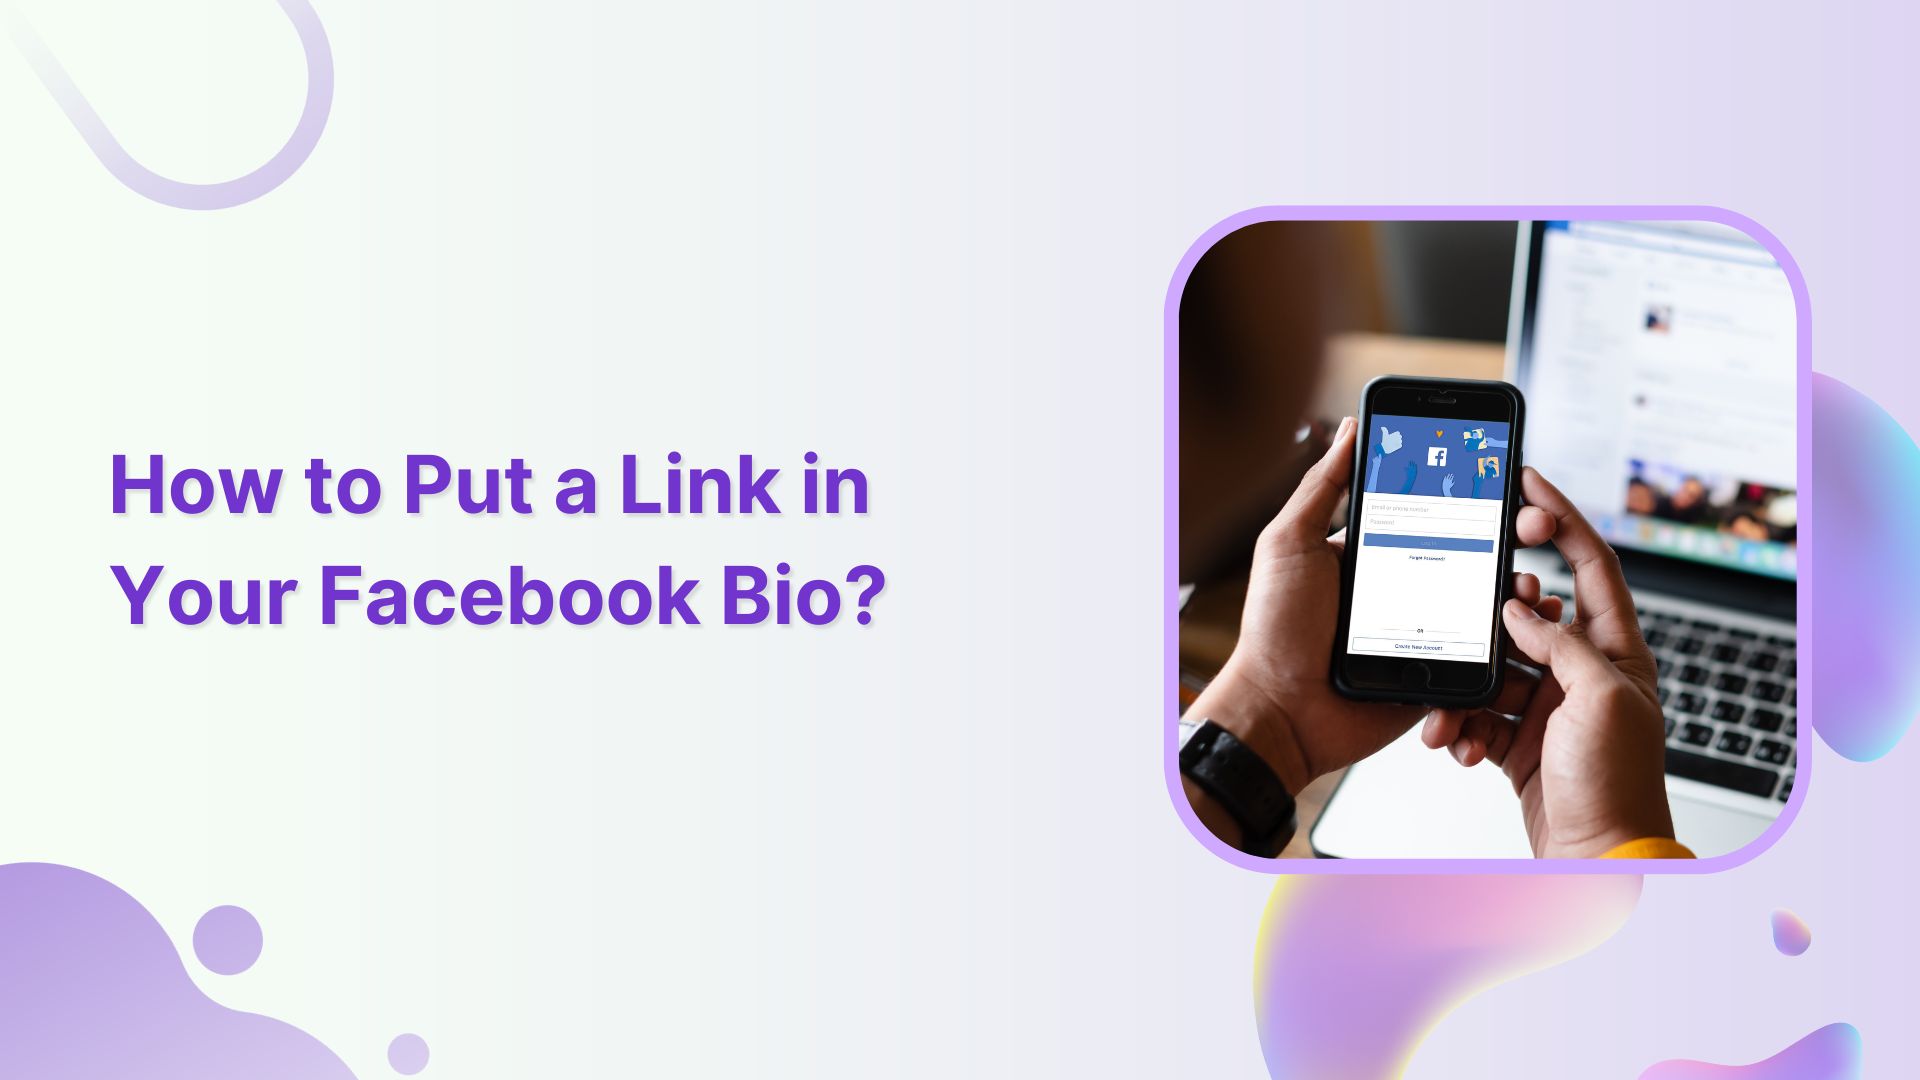 How to Put a Link in Your Facebook Bio?